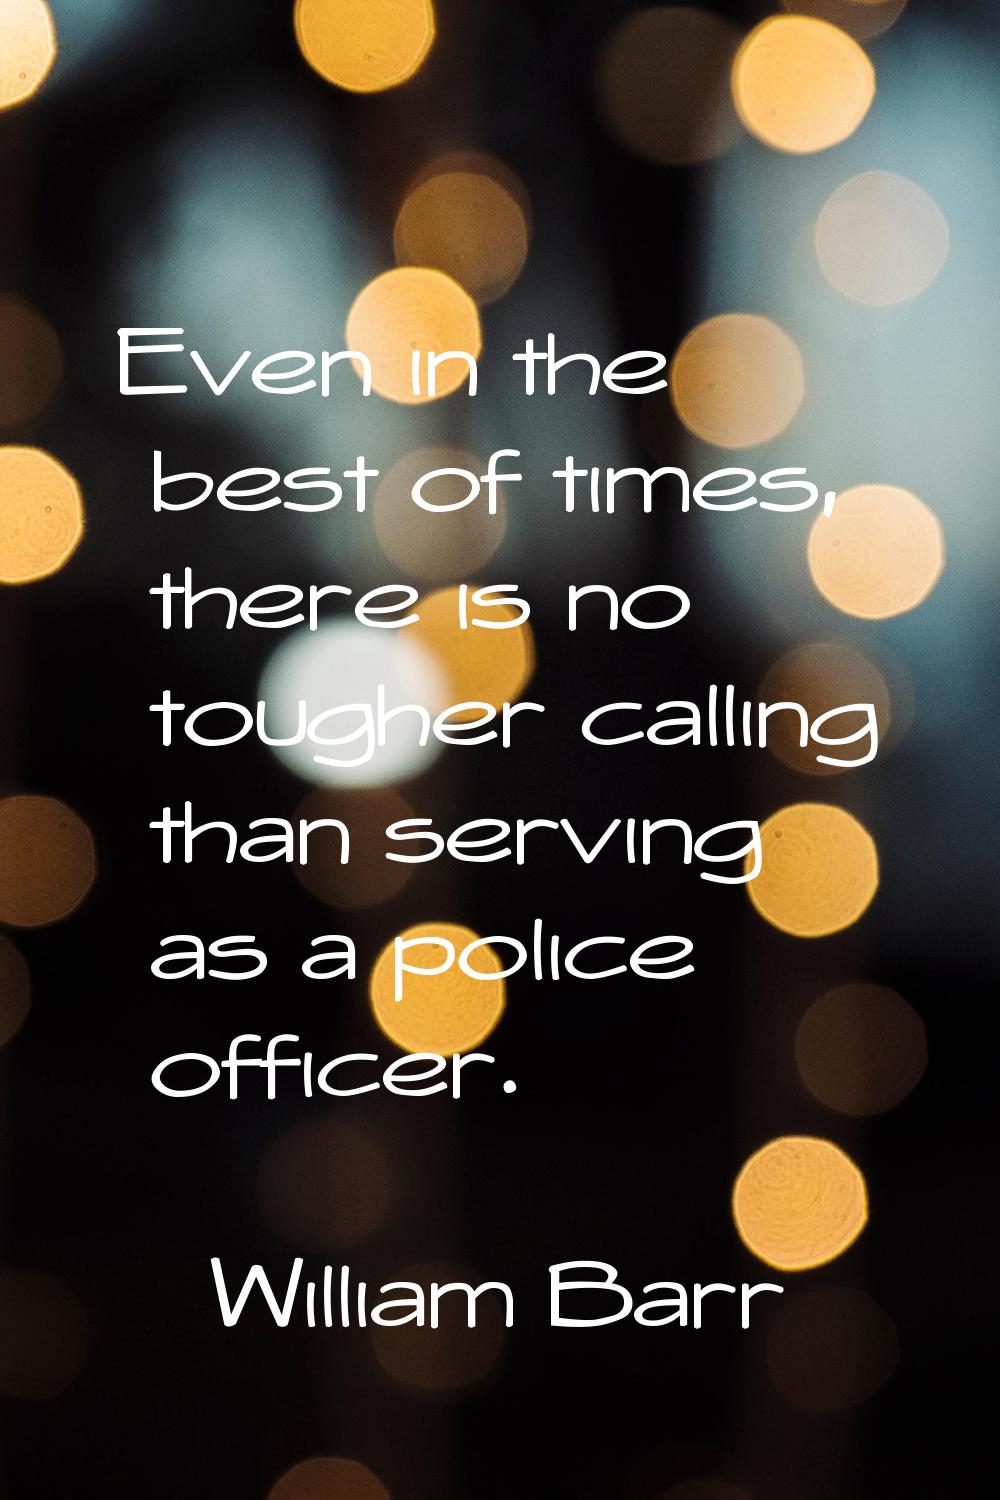 Even in the best of times, there is no tougher calling than serving as a police officer.